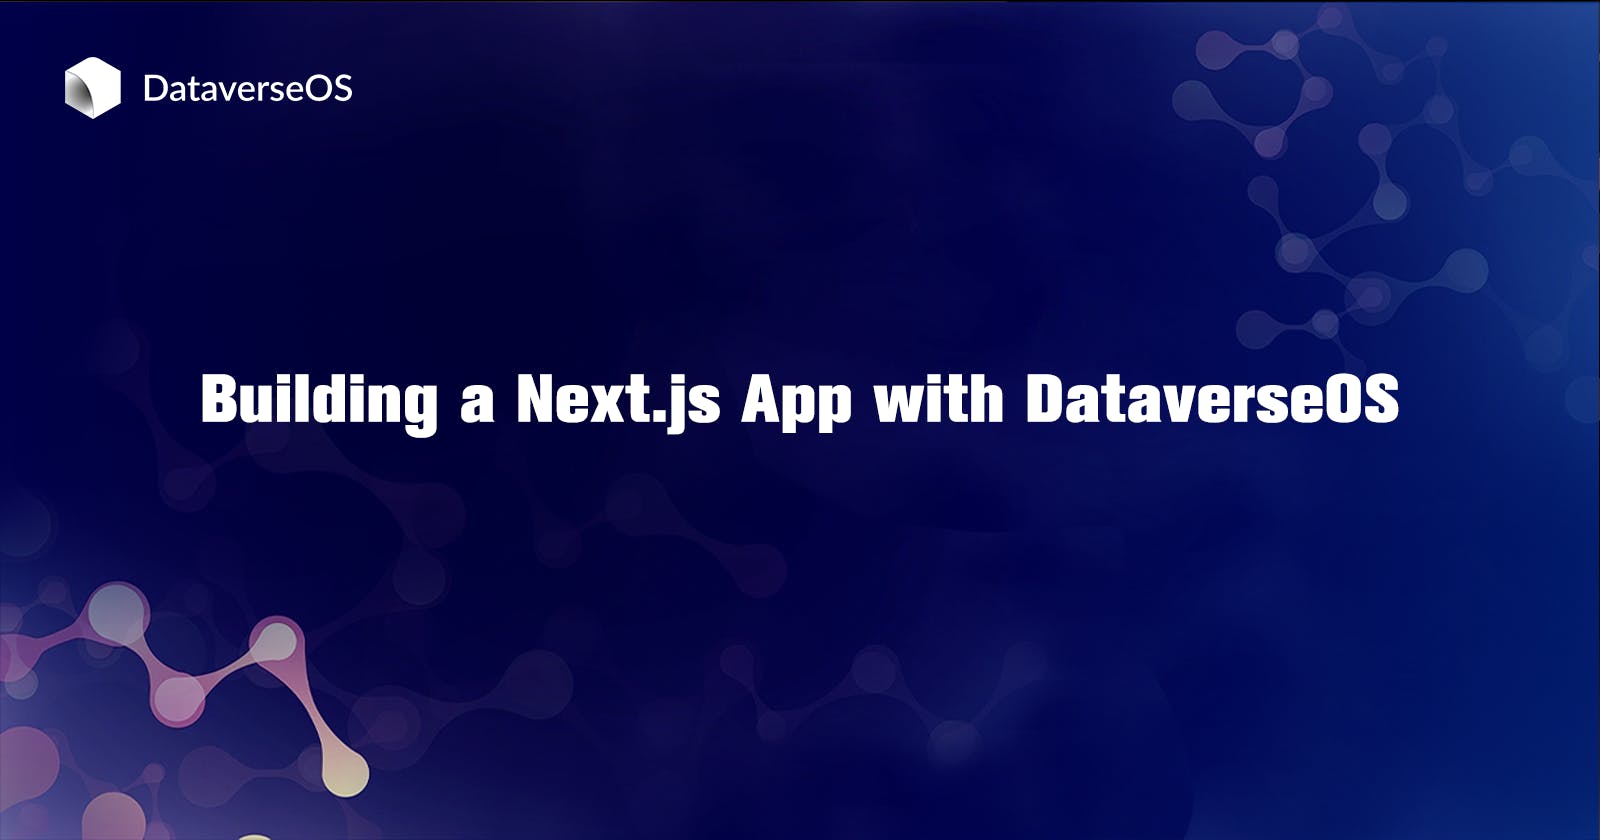 Building a Next.js App with DataverseOS, Typescript, and Next.js: A Step-by-Step Guide